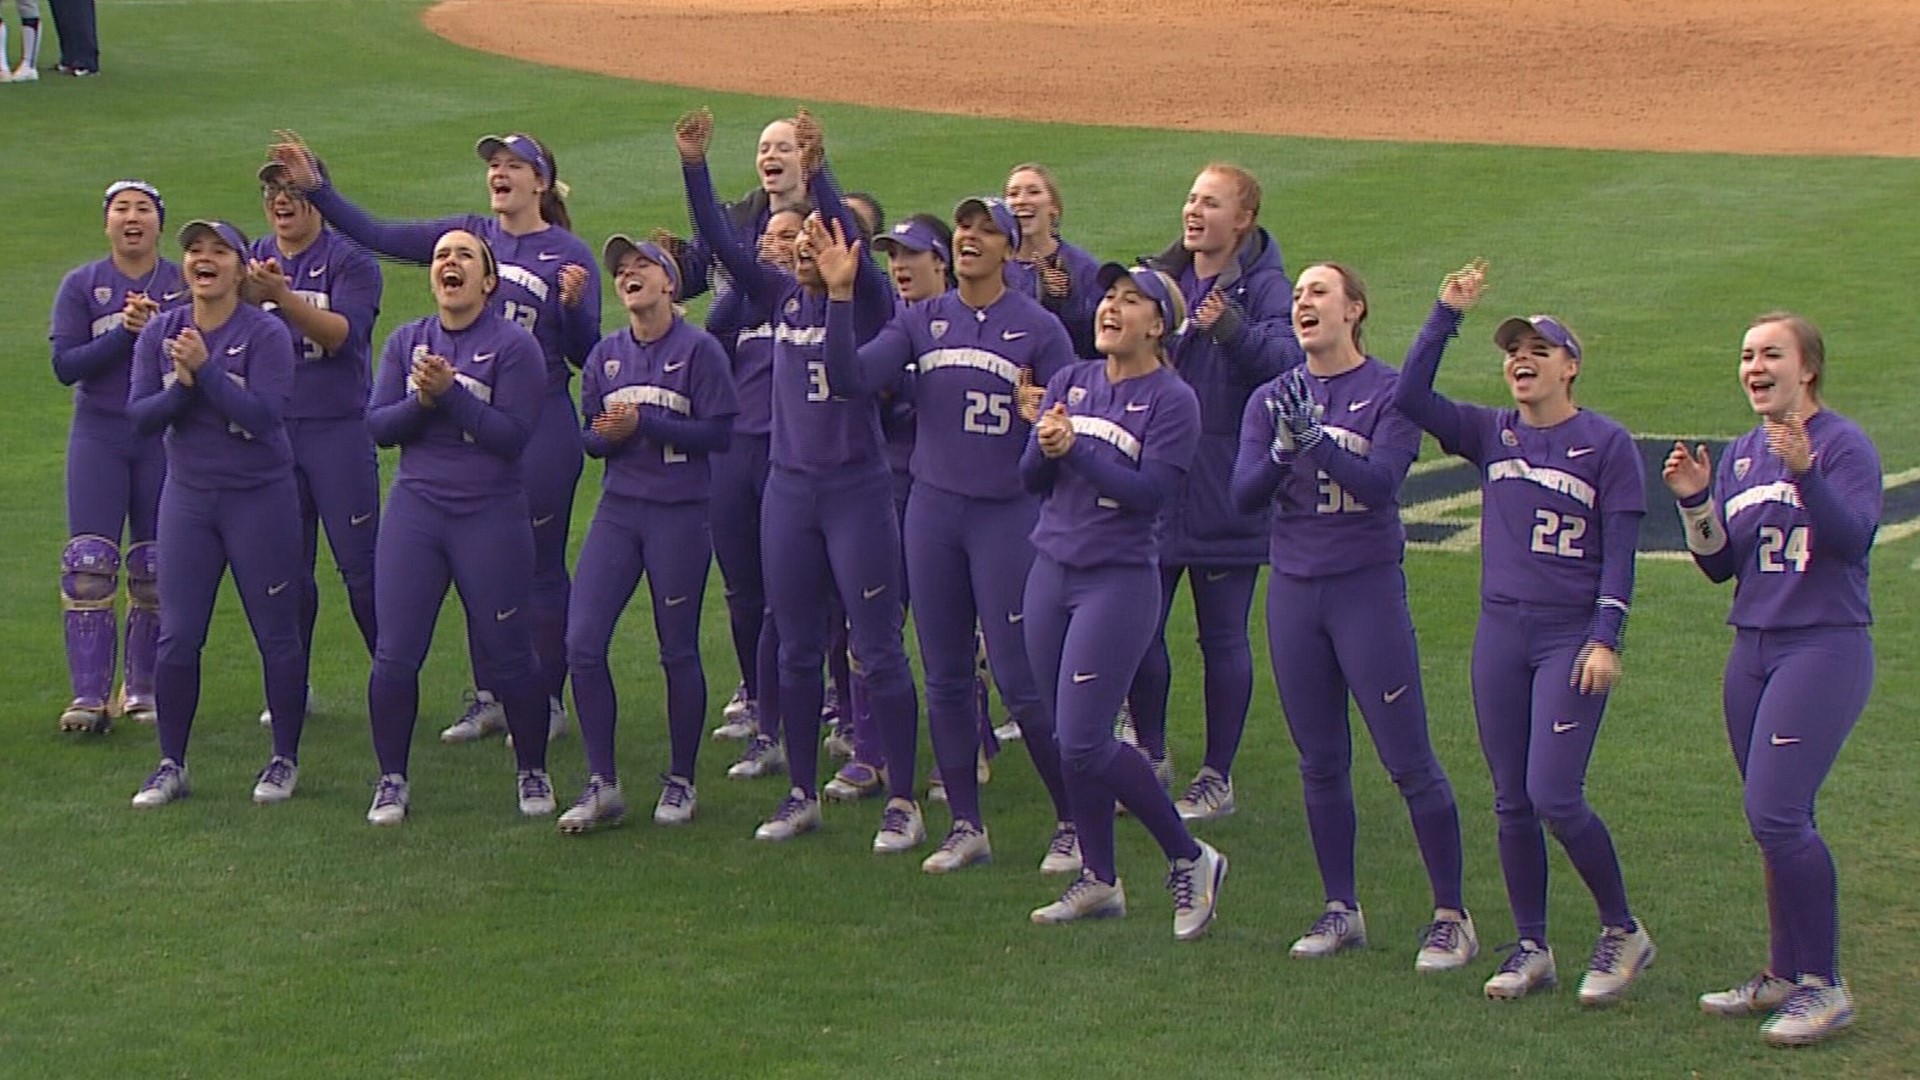 UW Softball drops Game 1 of World Series to Florida State